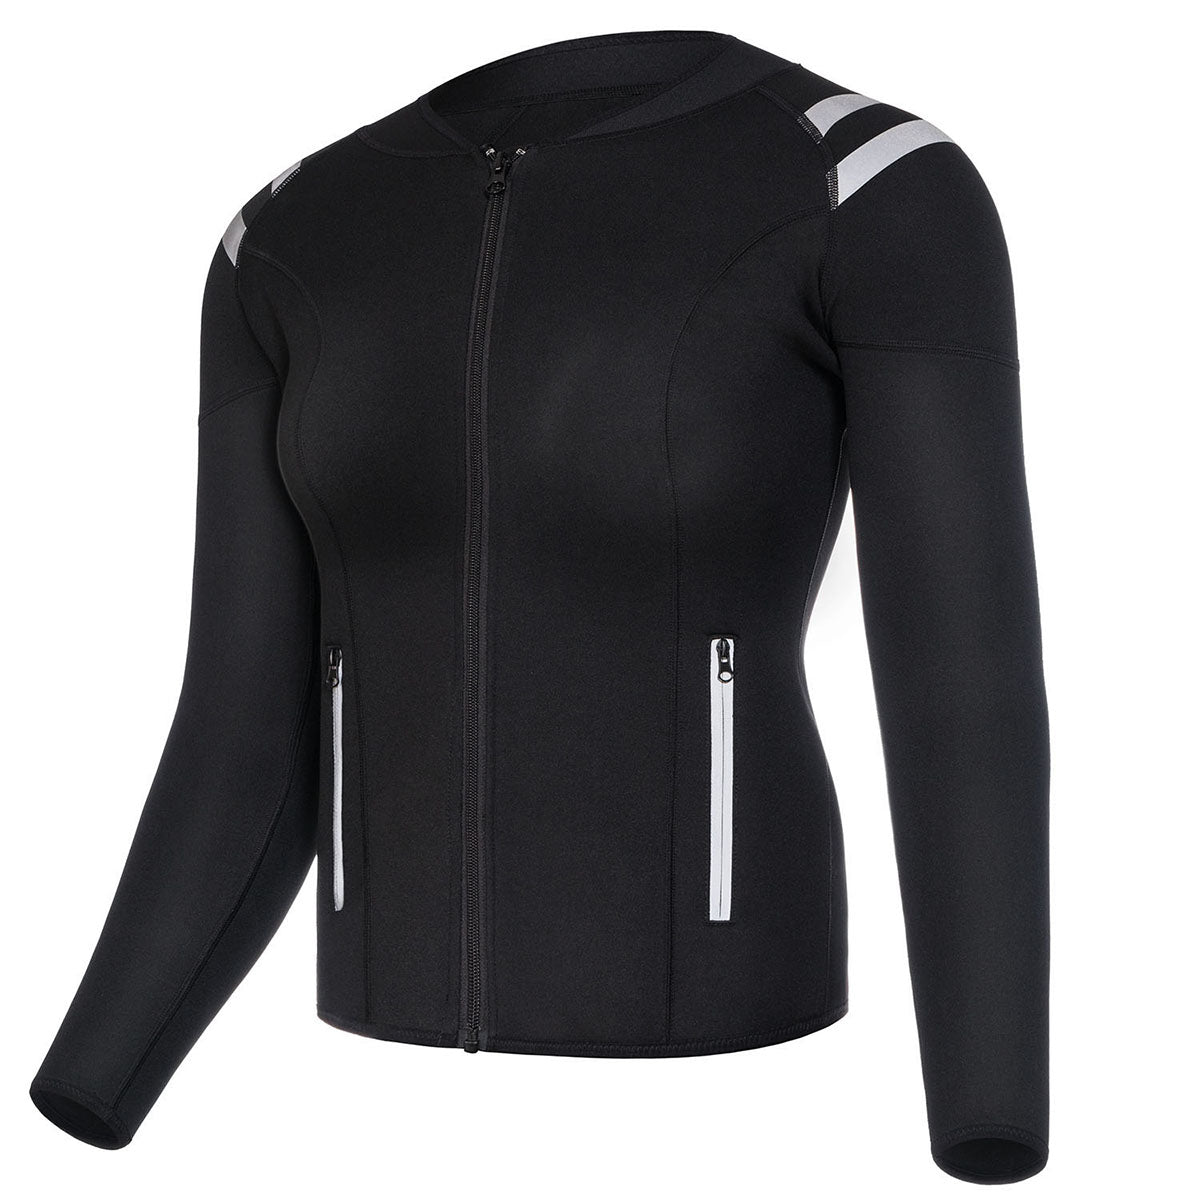 Zipper Hot Sauna Jacket For Women With Reflective Tapes - Nebility